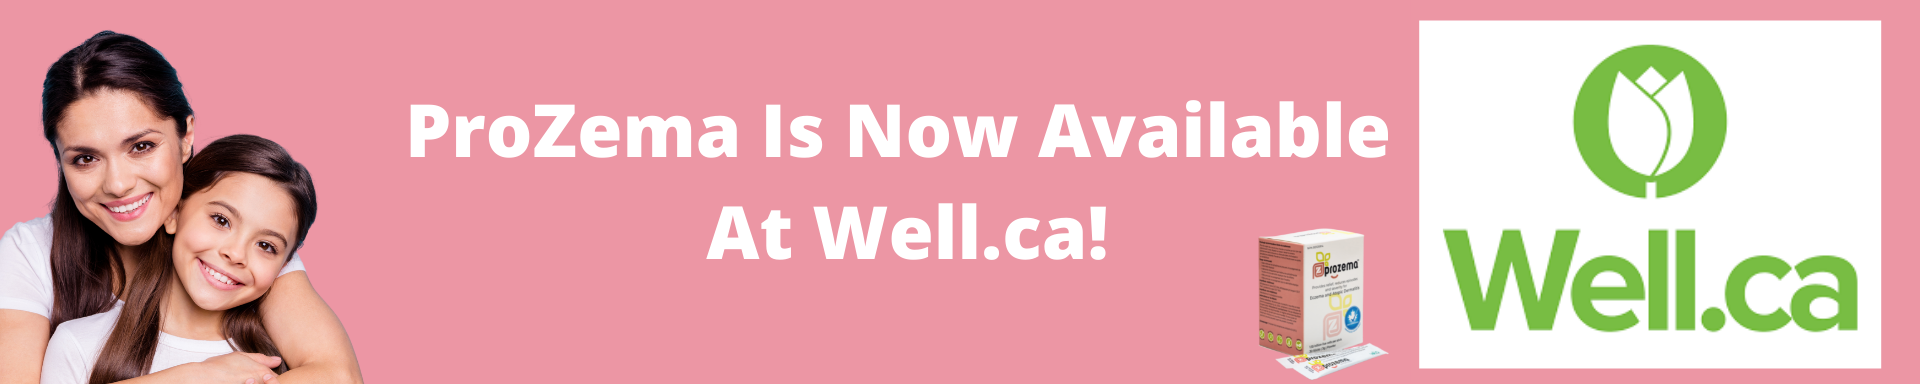 ProZema is now available at Well.ca